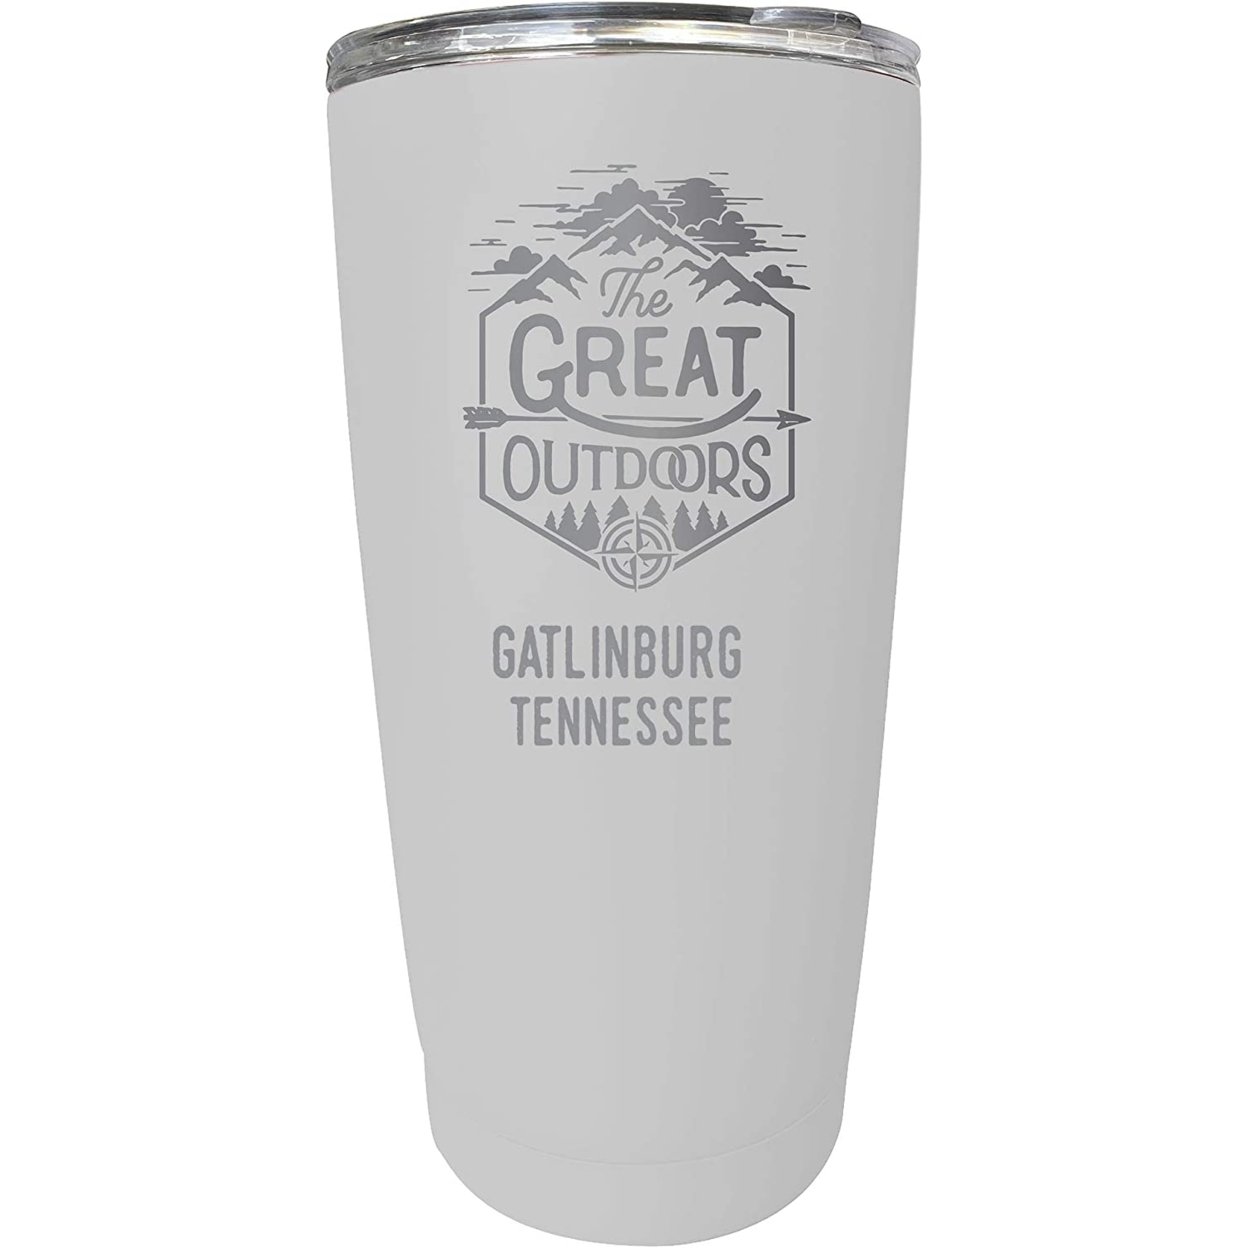 Gatlinburg Tennessee Etched 16 Oz Stainless Steel Insulated Tumbler Outdoor Adventure Design - White